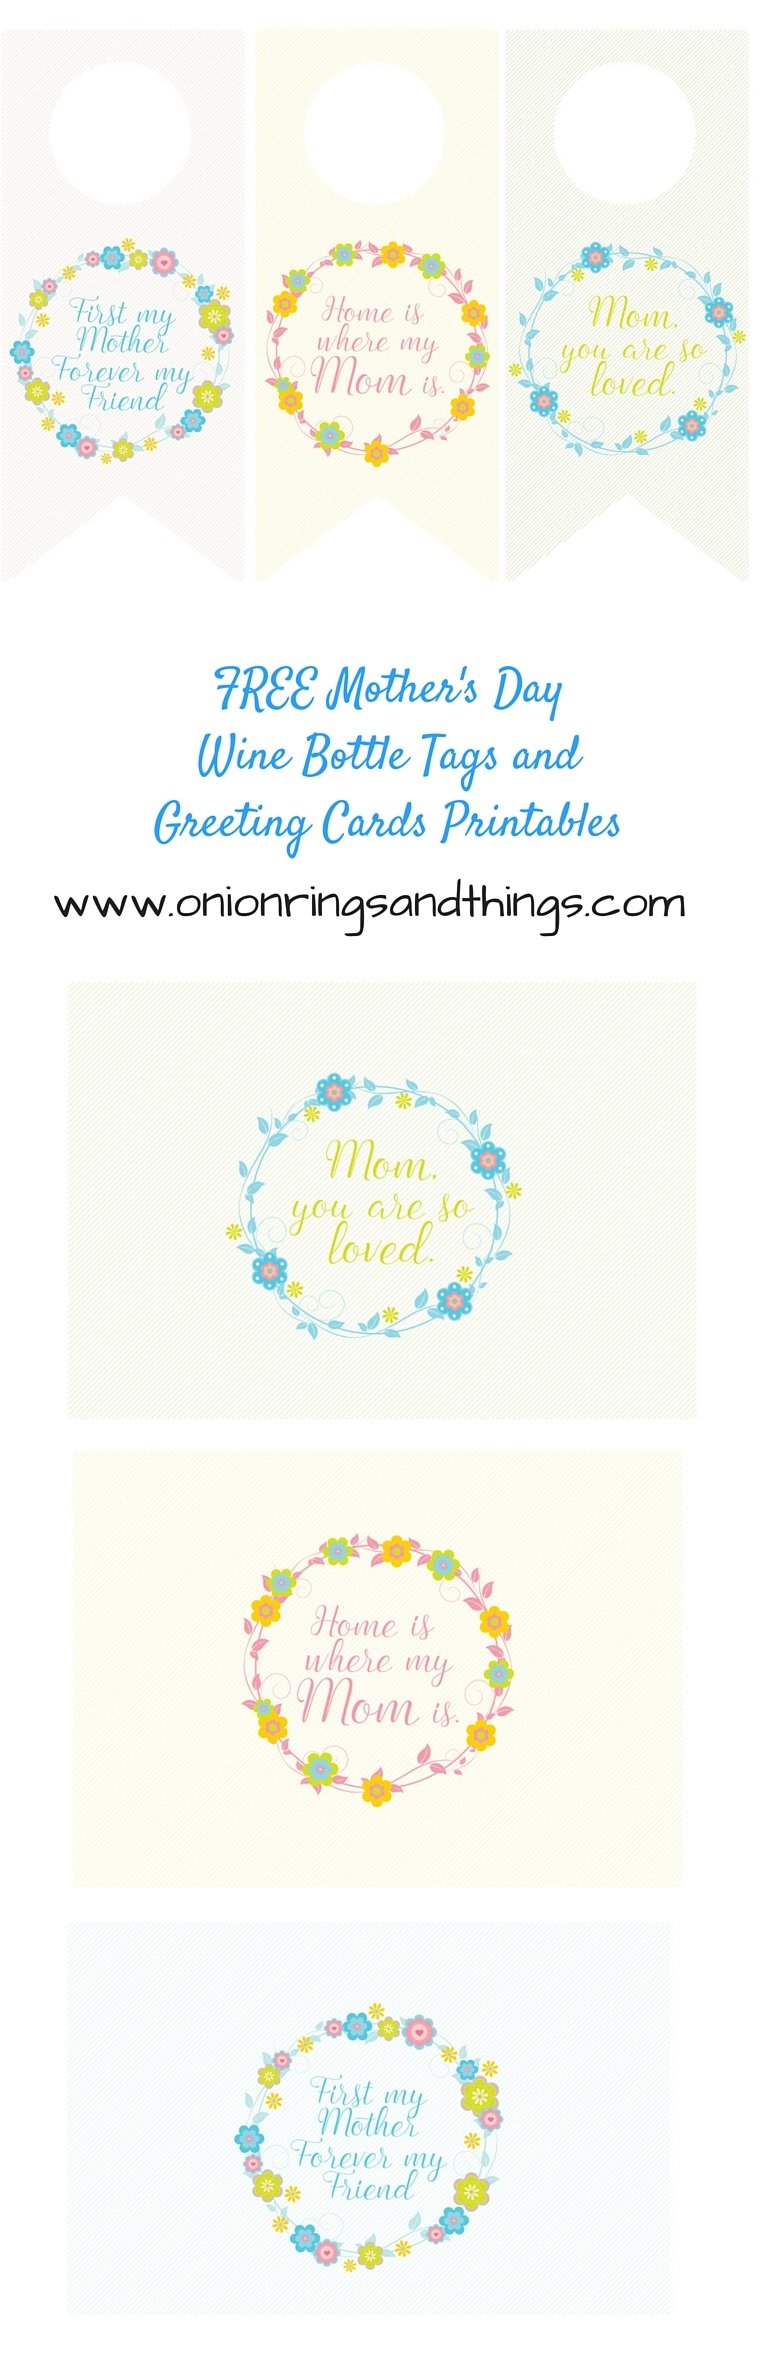 Mother's Day Wine Bottle Tags and Greeting Cards FREE Printables